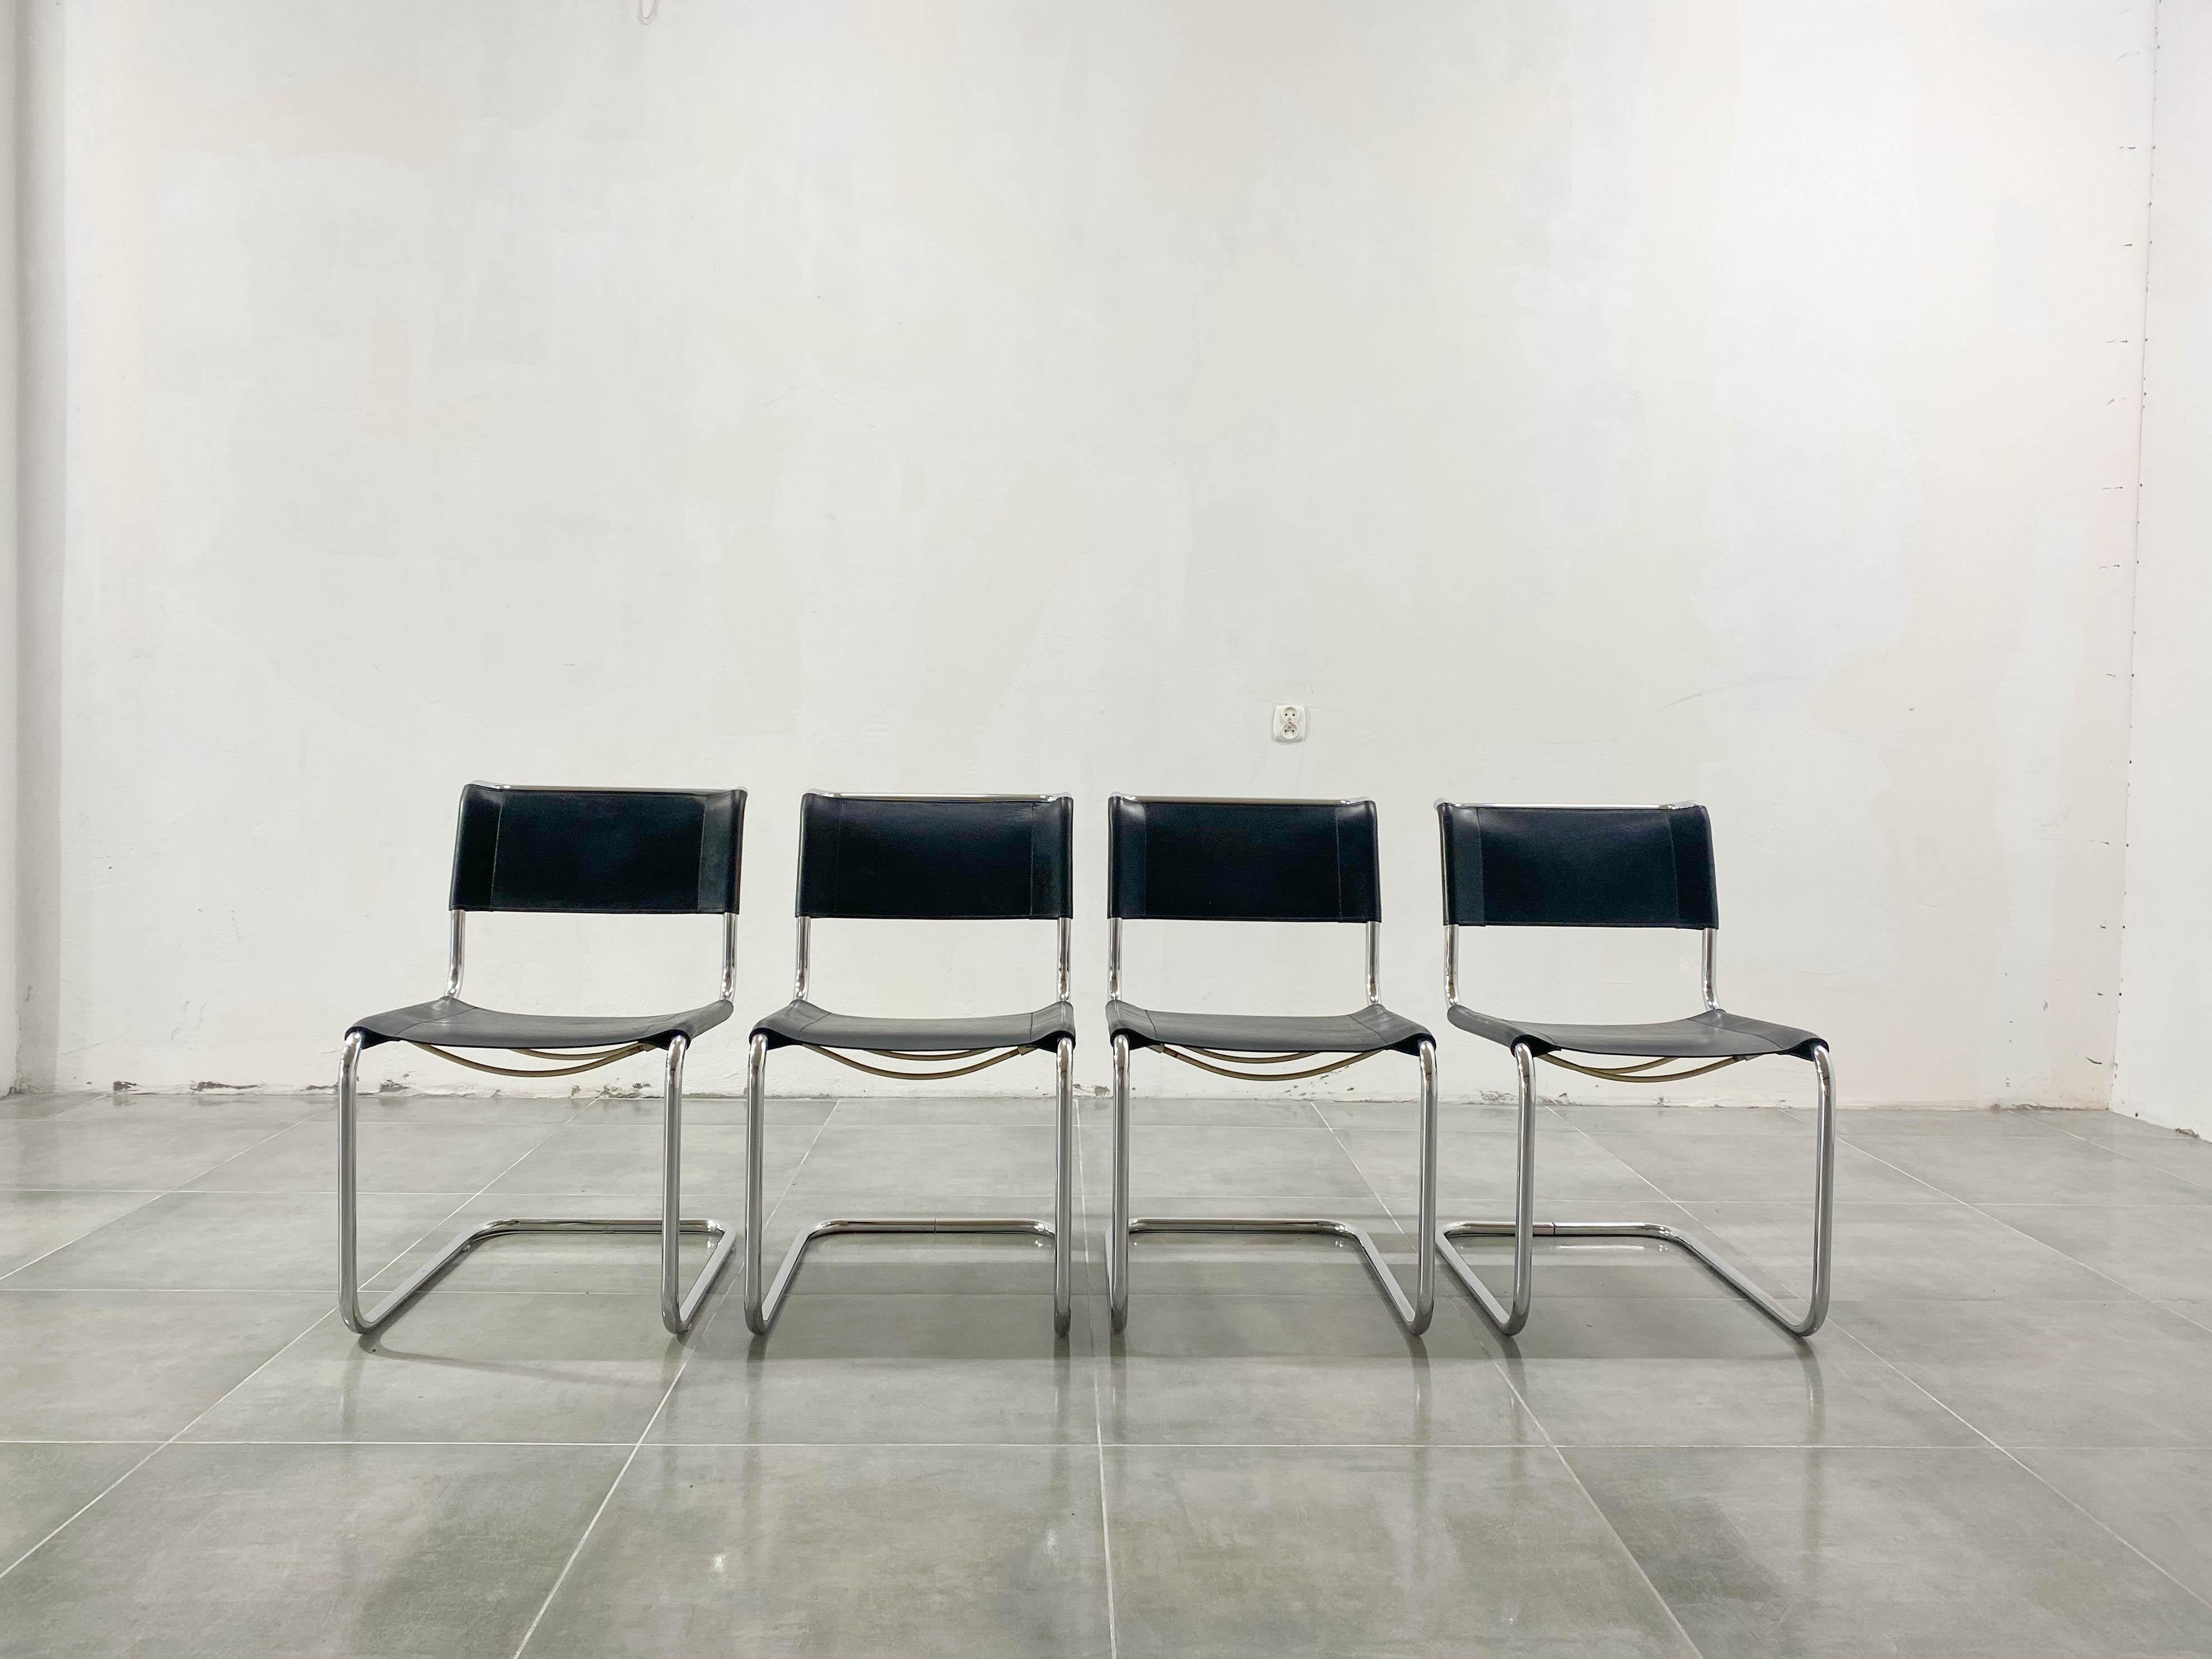 Introducing the iconic S33 Chair Set by Mart Stam, proudly crafted by Thonet. This collection, produced during the 1980s in Germany, pays homage to the timeless designs of the Bauhaus era. With an attribution mark guaranteeing authenticity, these